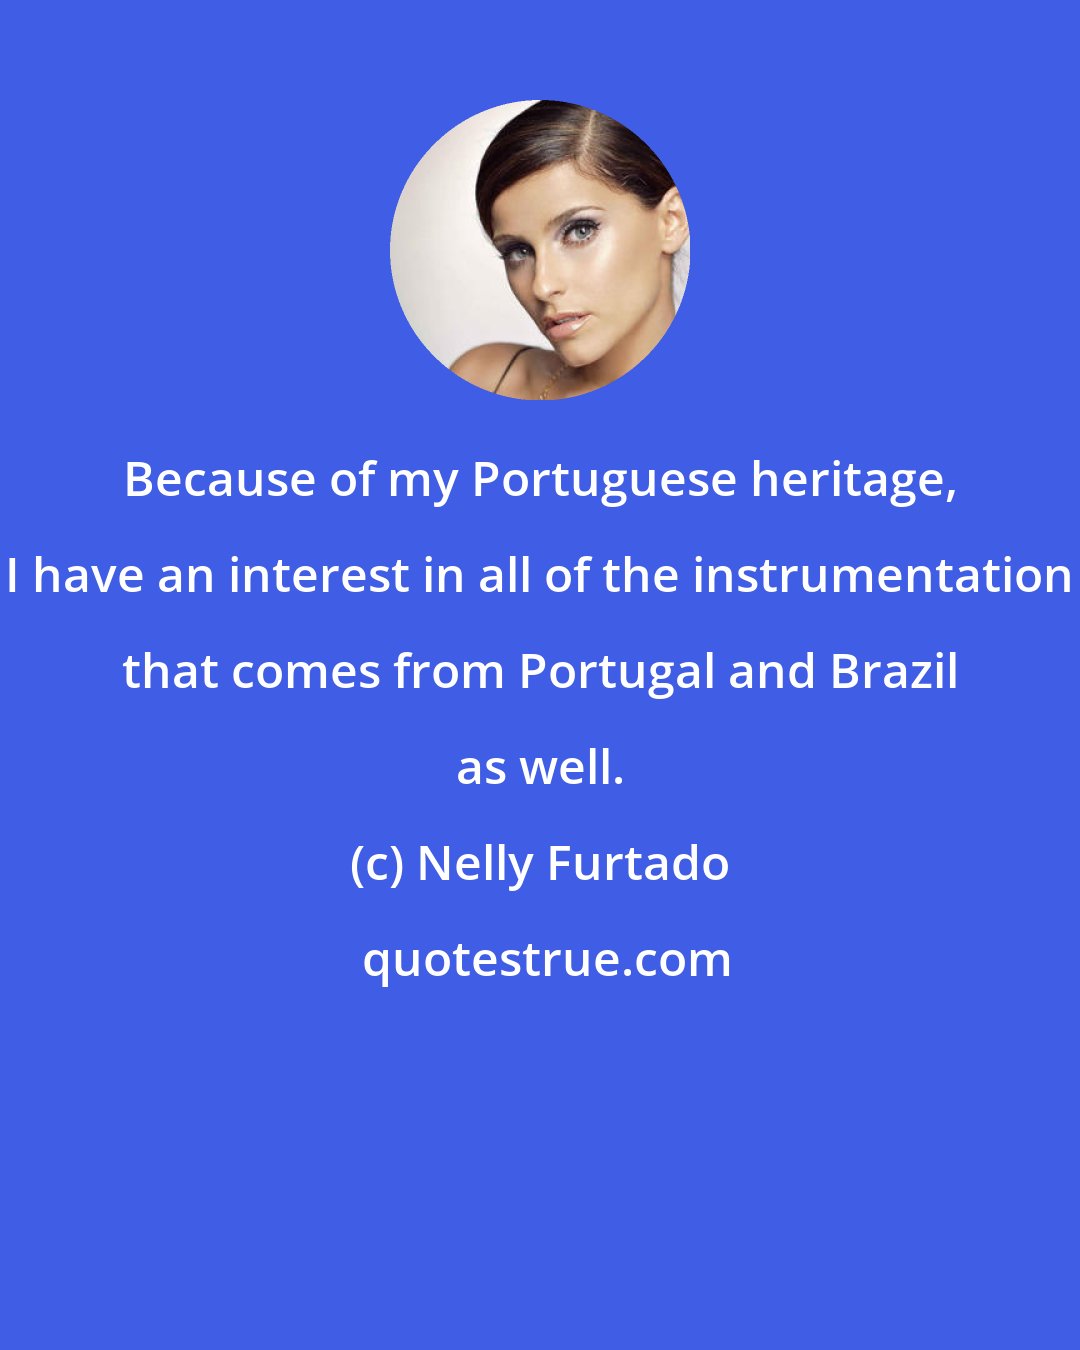 Nelly Furtado: Because of my Portuguese heritage, I have an interest in all of the instrumentation that comes from Portugal and Brazil as well.